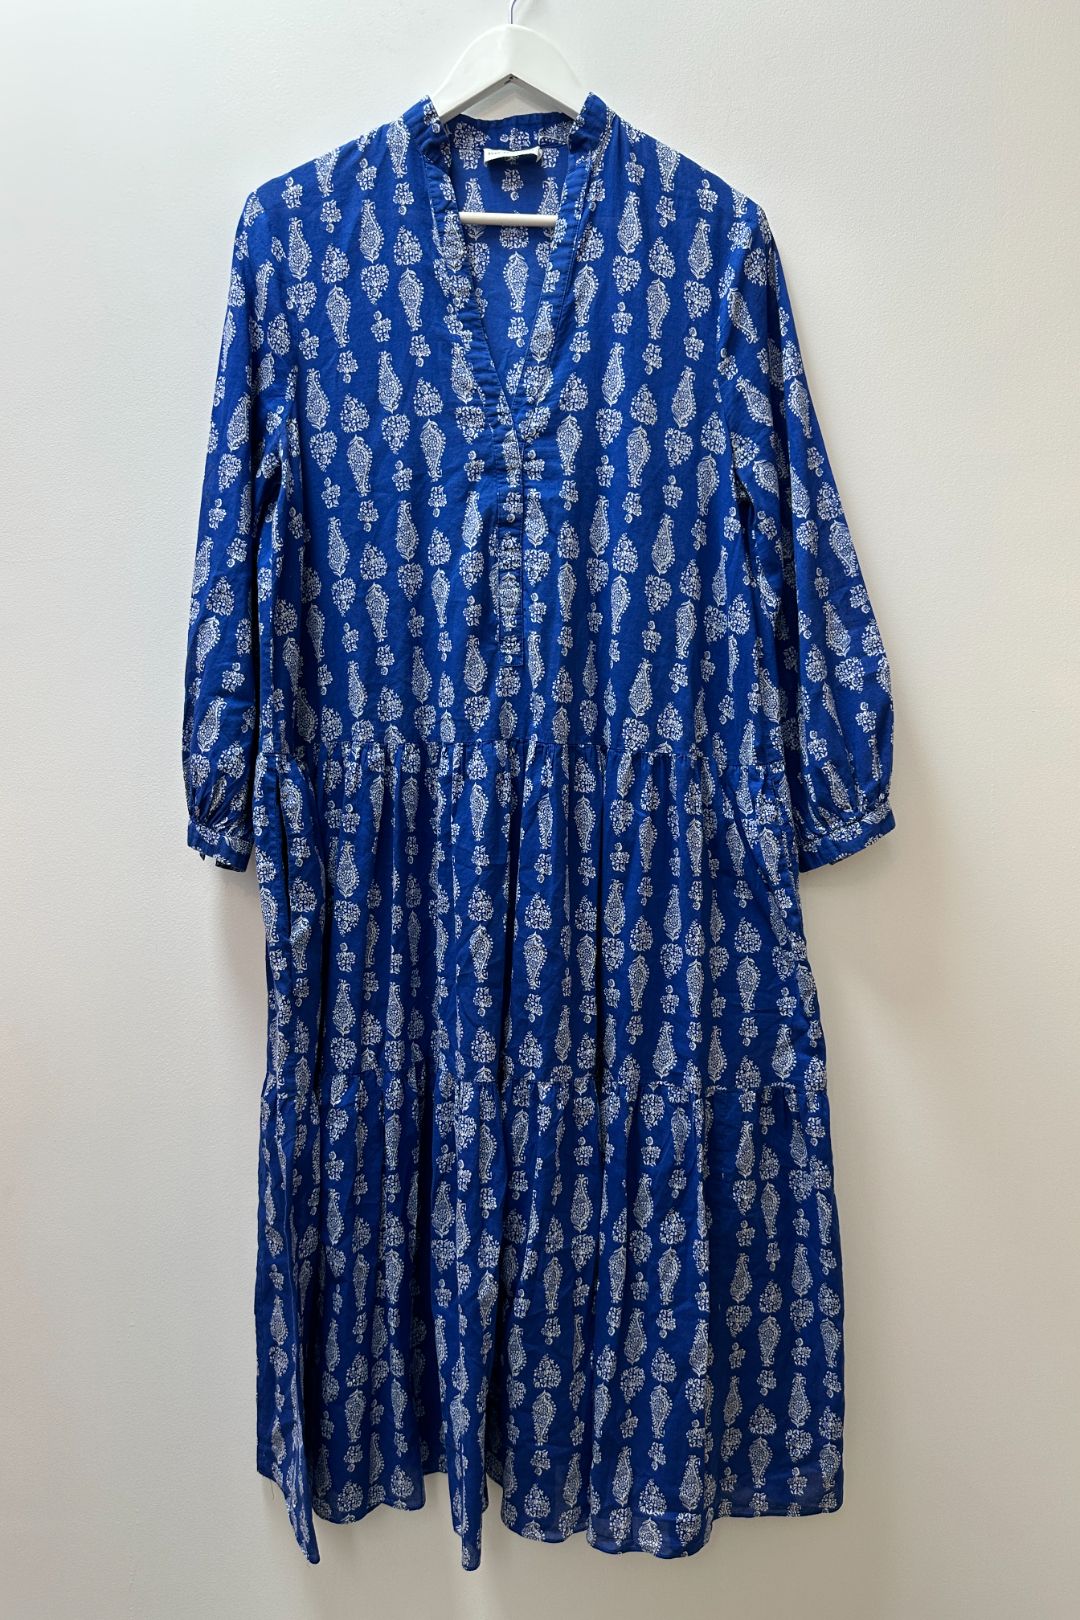 Scanlan Theodore Blue and White Paisley Dress